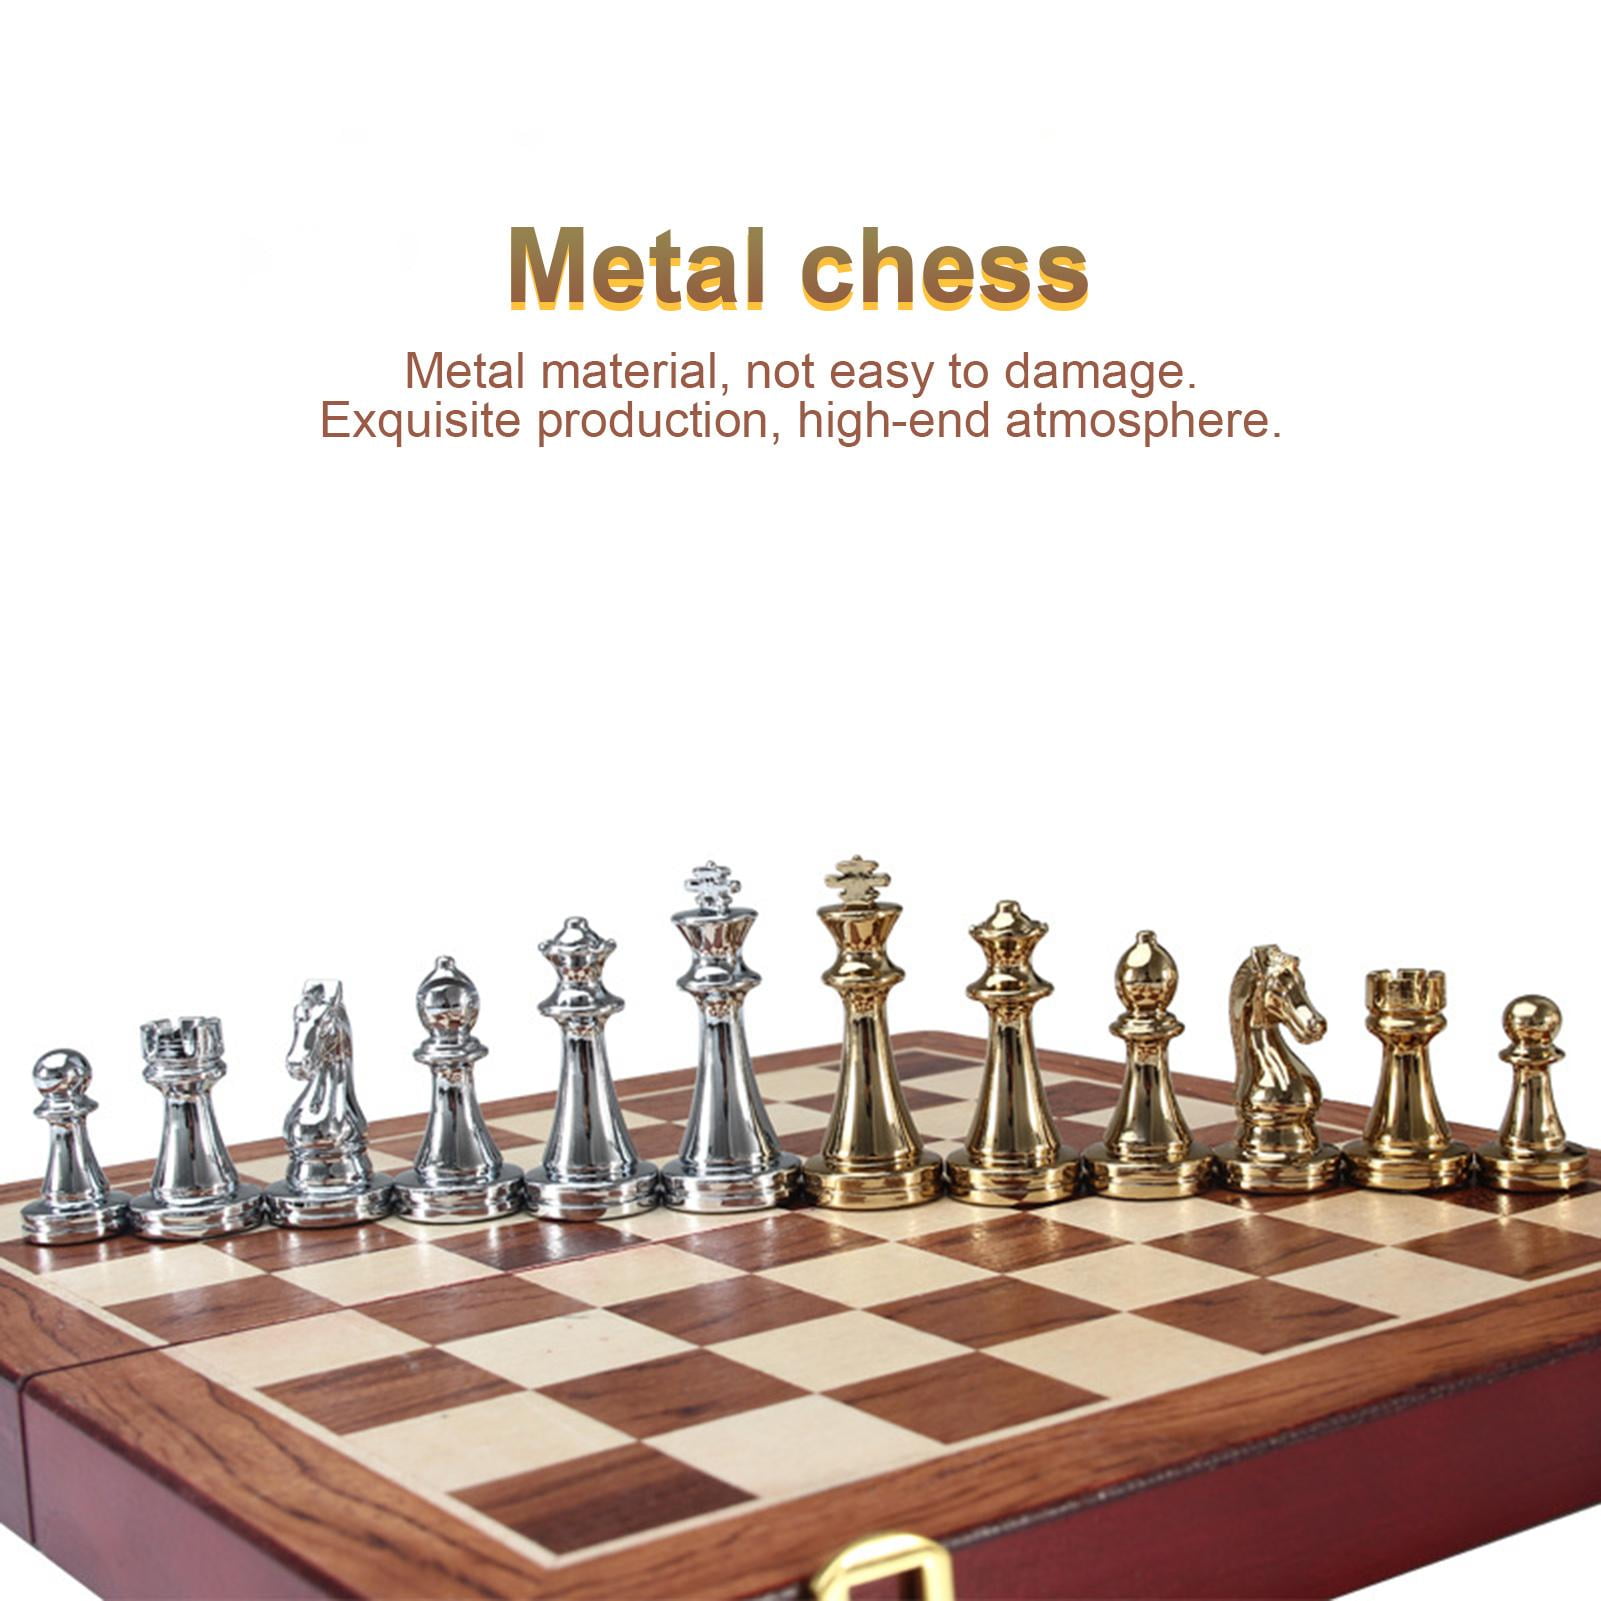 Details about   Travel 12inch Folding Chess Board,Metal Chess Set for Boys Girls Kids 